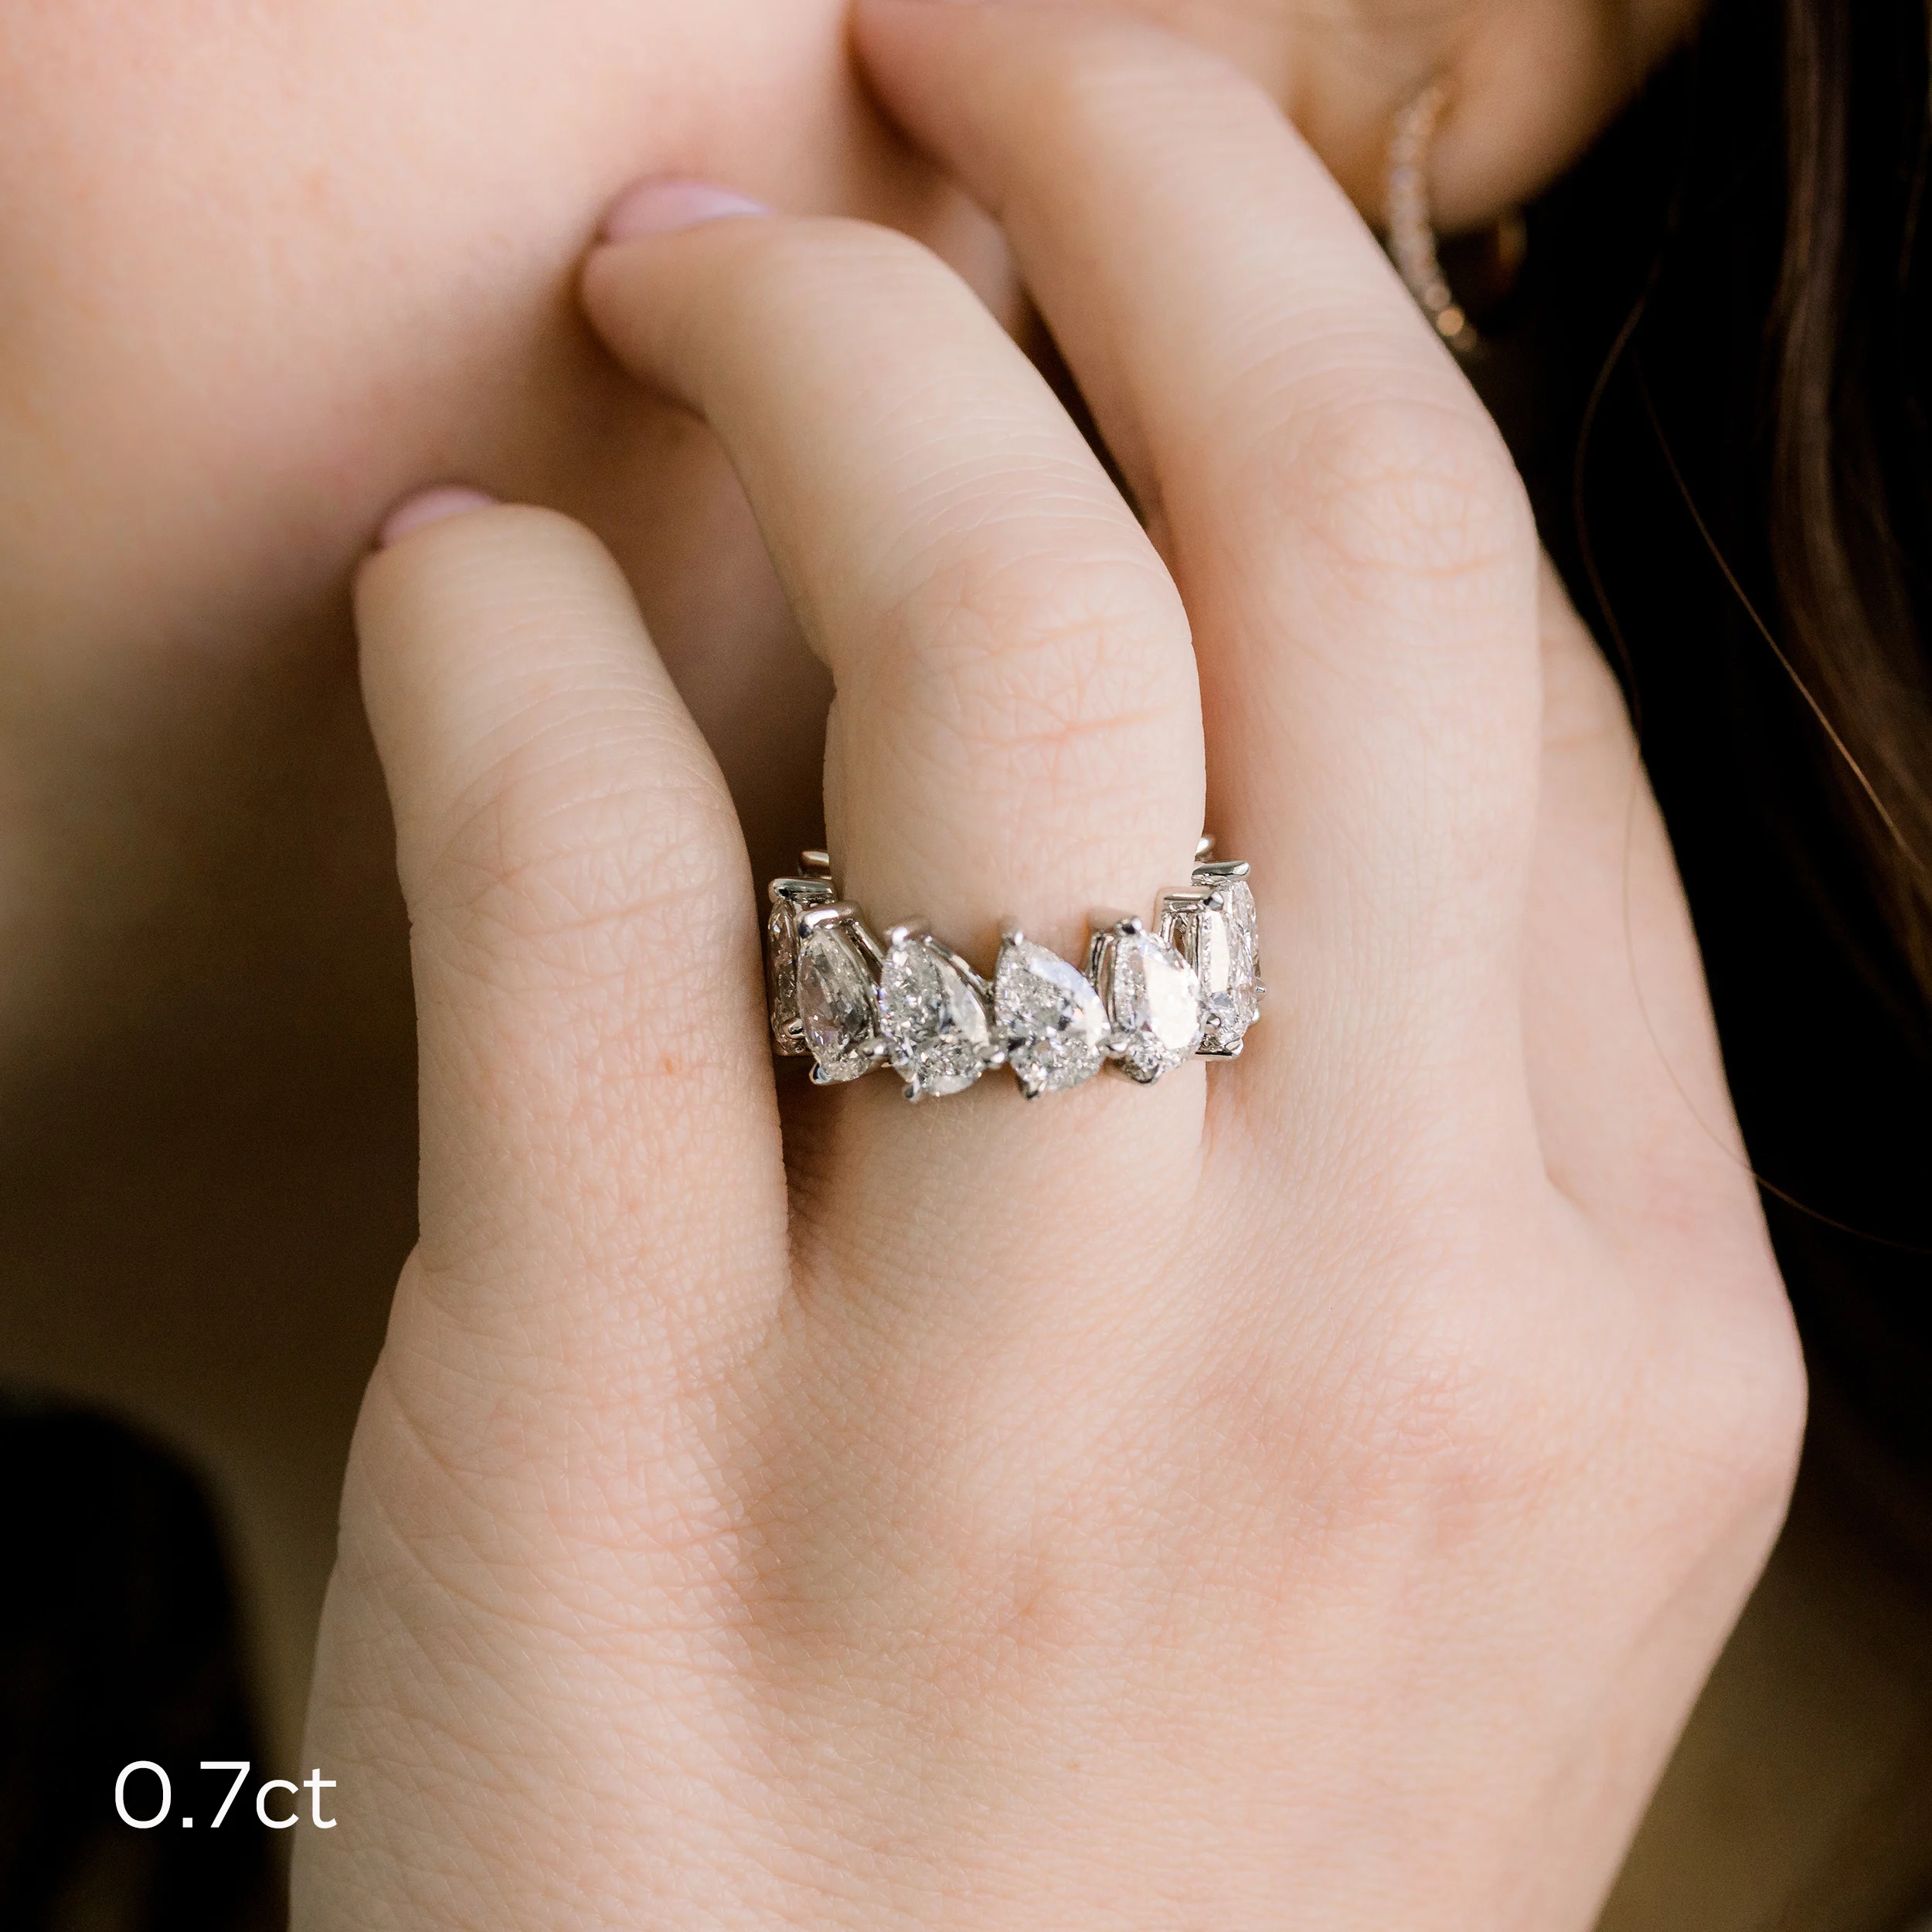 9.0 ct Lab Grown Diamonds set in Platinum Pear Angled Eternity Band in Platinum 9ctw (Main View)